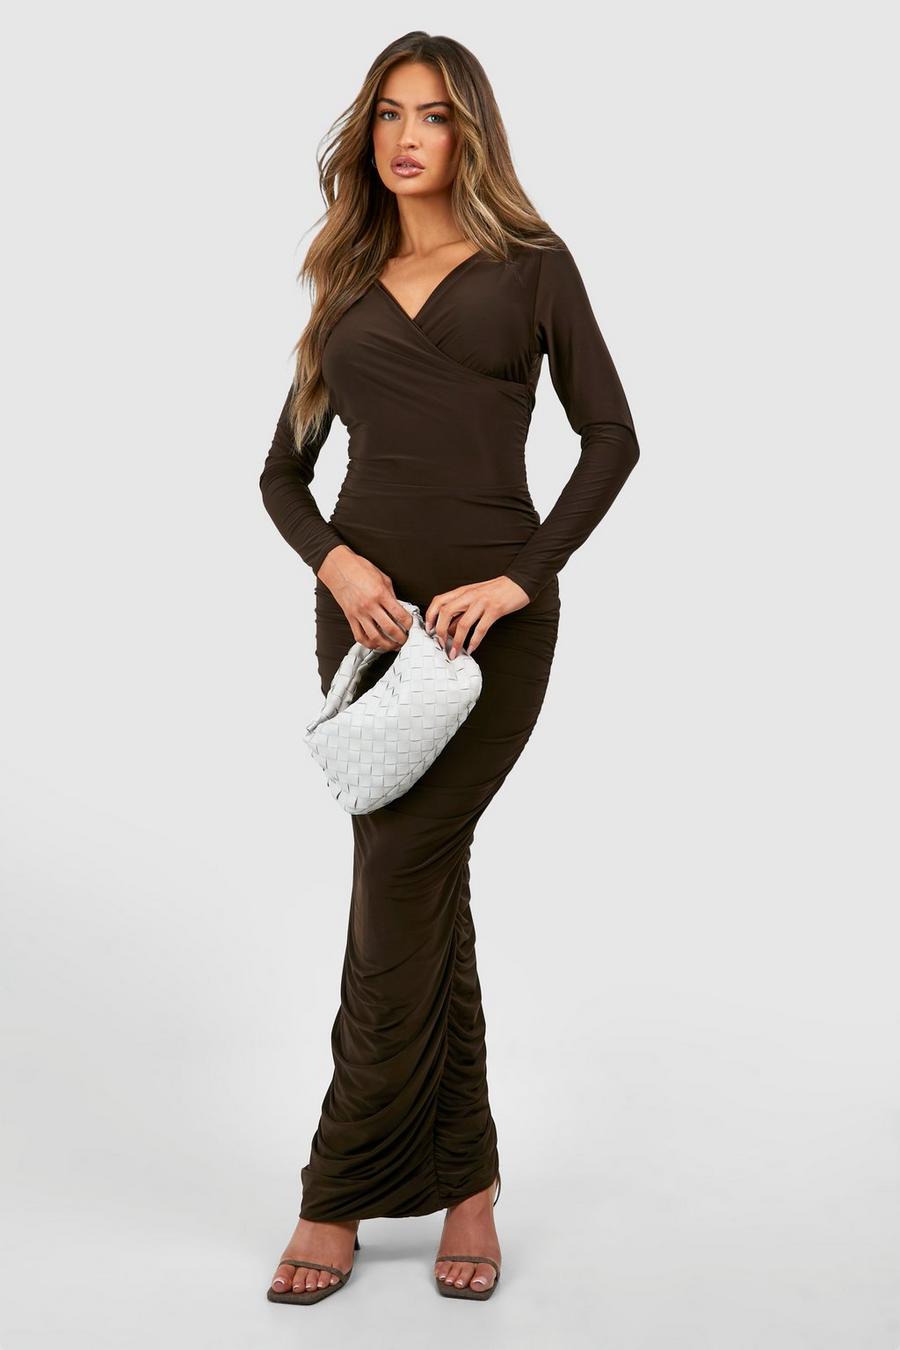 Chocolate brown V Neck Ruched Slinky Maxi Dress